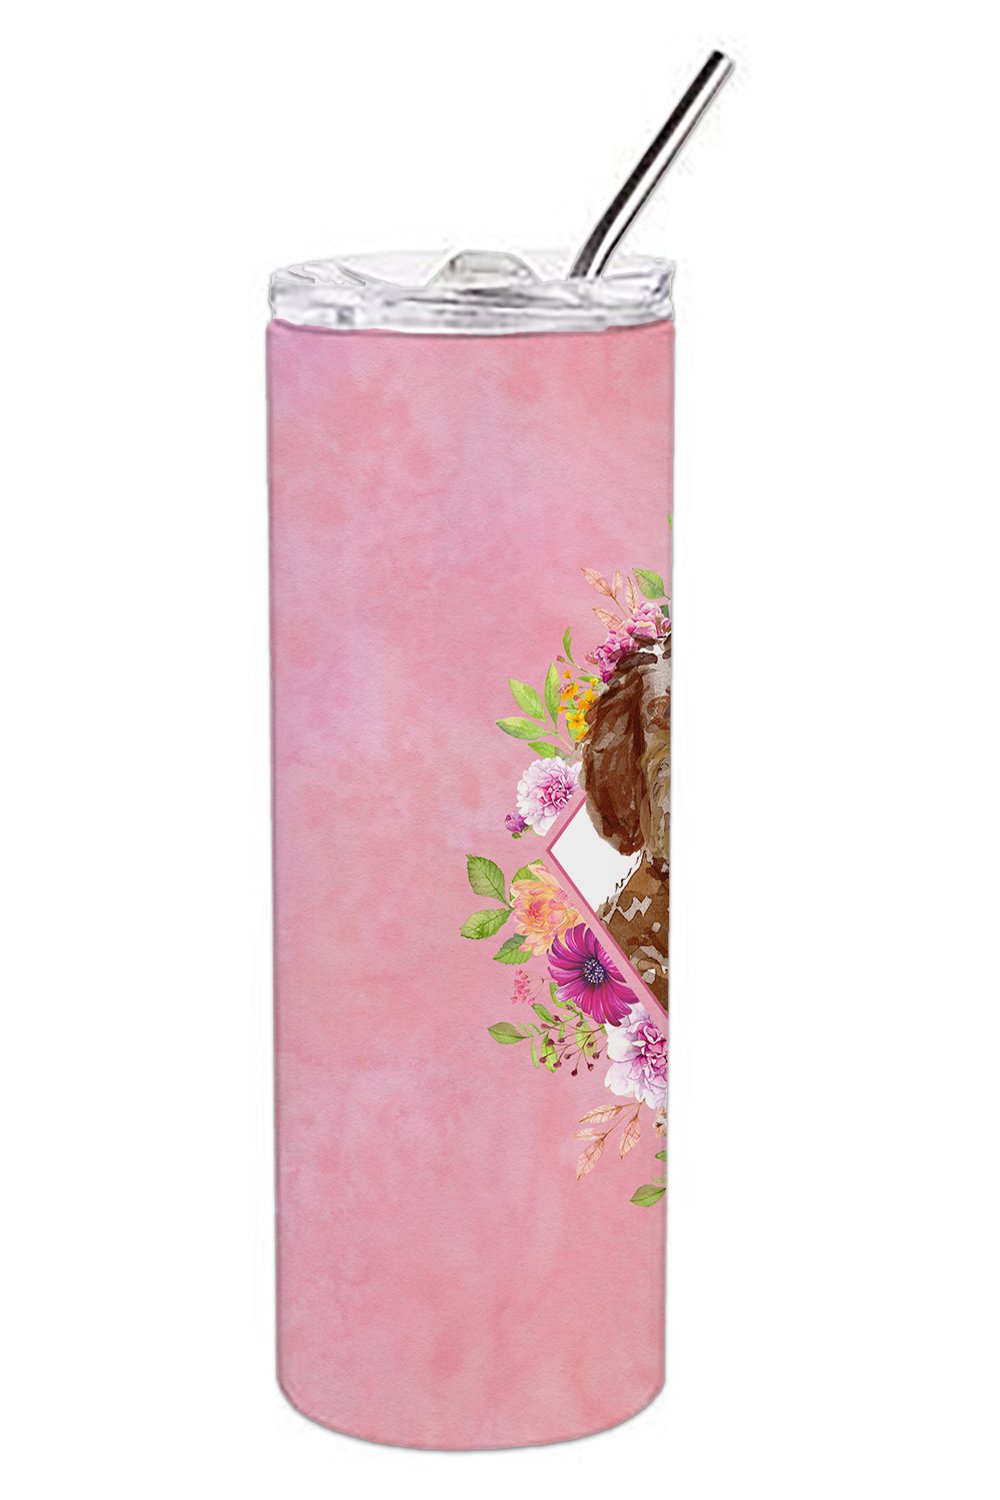 Labradoodle Pink Flowers Double Walled Stainless Steel 20 oz Skinny Tumbler CK4228TBL20 by Caroline's Treasures